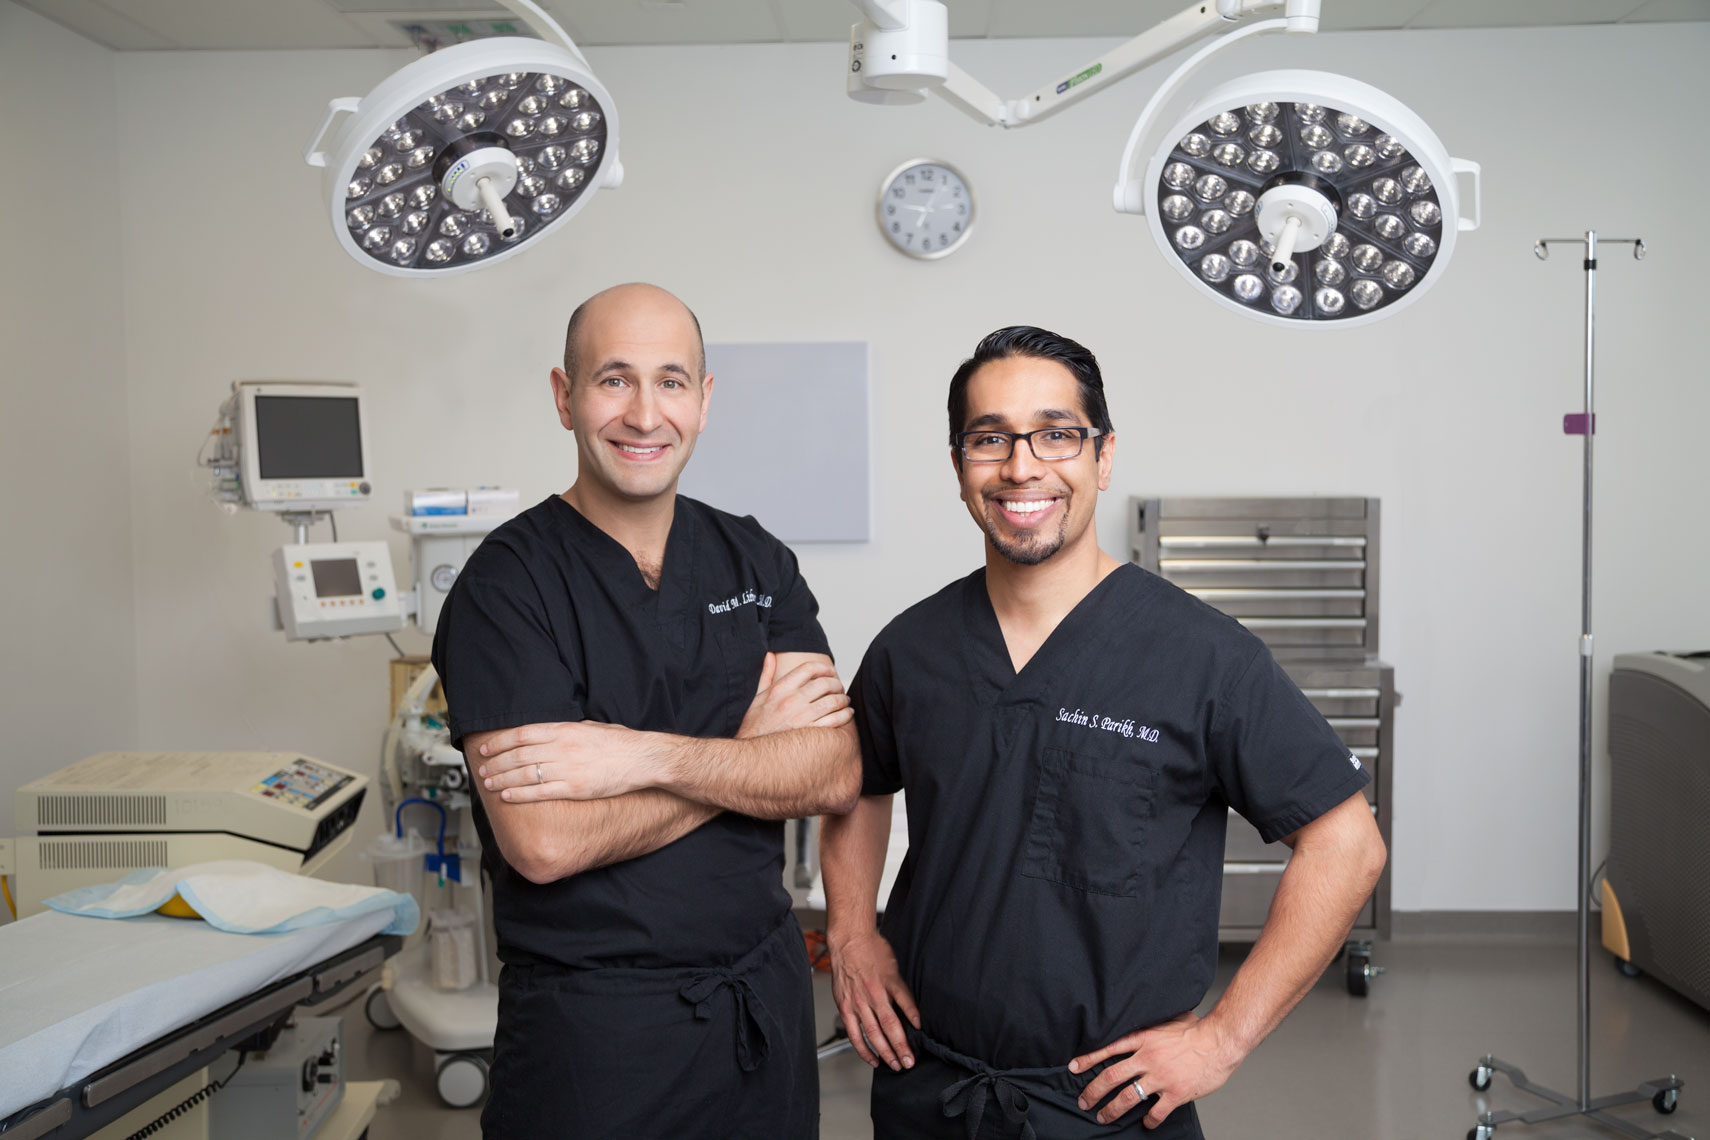 Dr. Lieberman and Dr. Parikh, For the Face